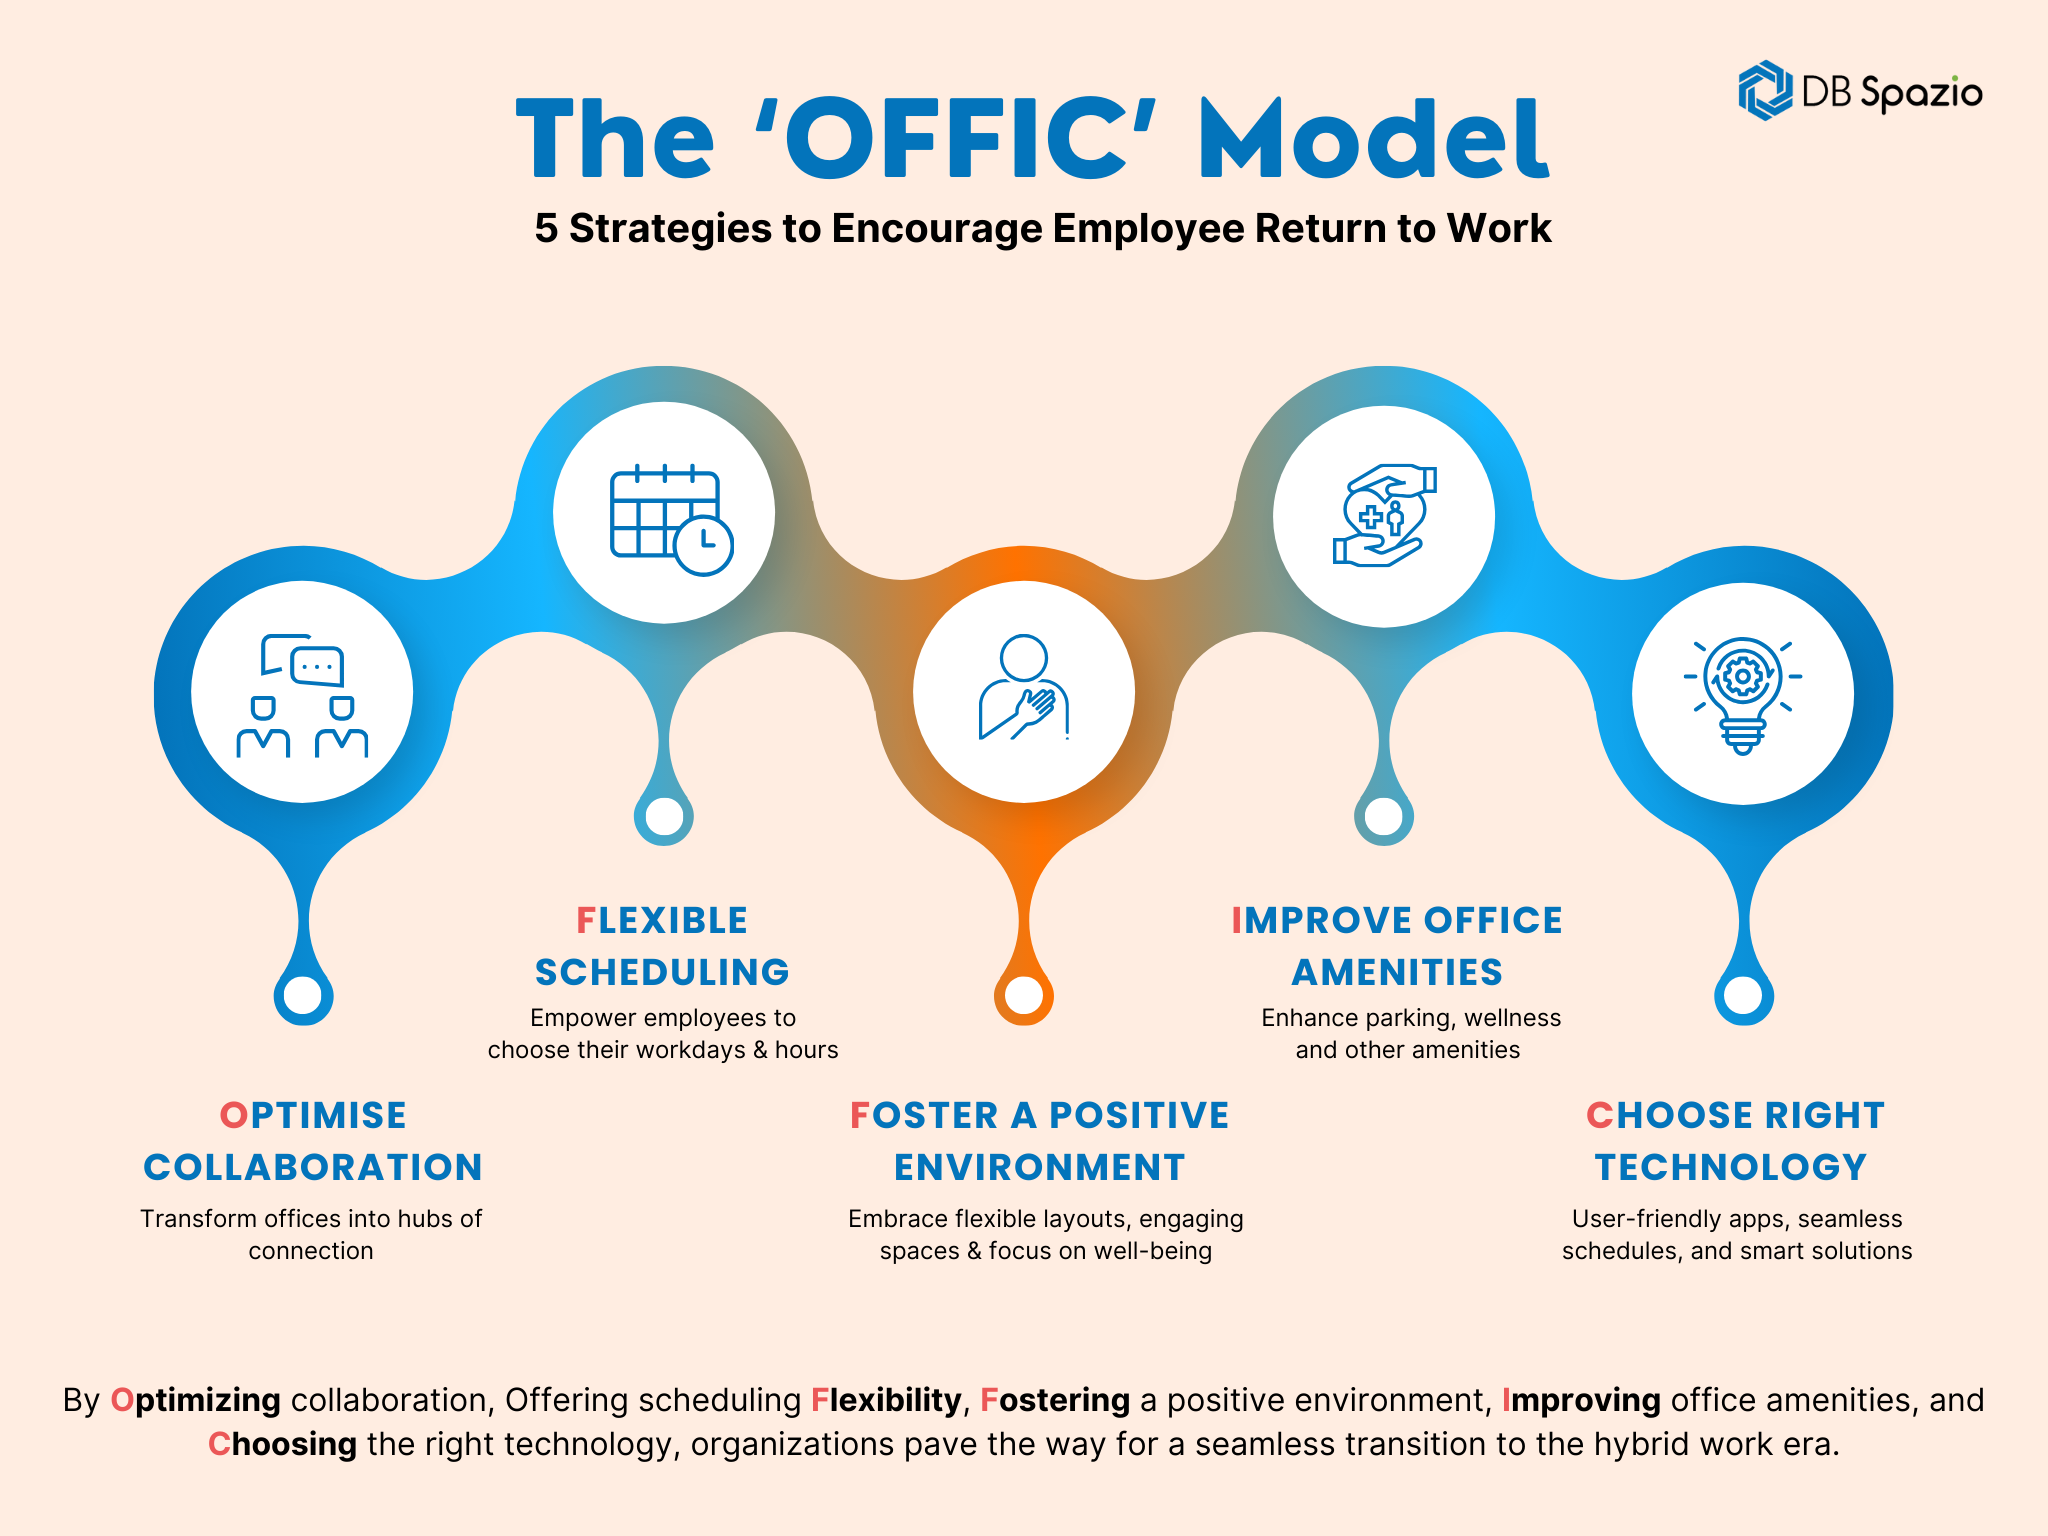 OFFIC model from DB Spazio for implementing Return to Work Strategies. 